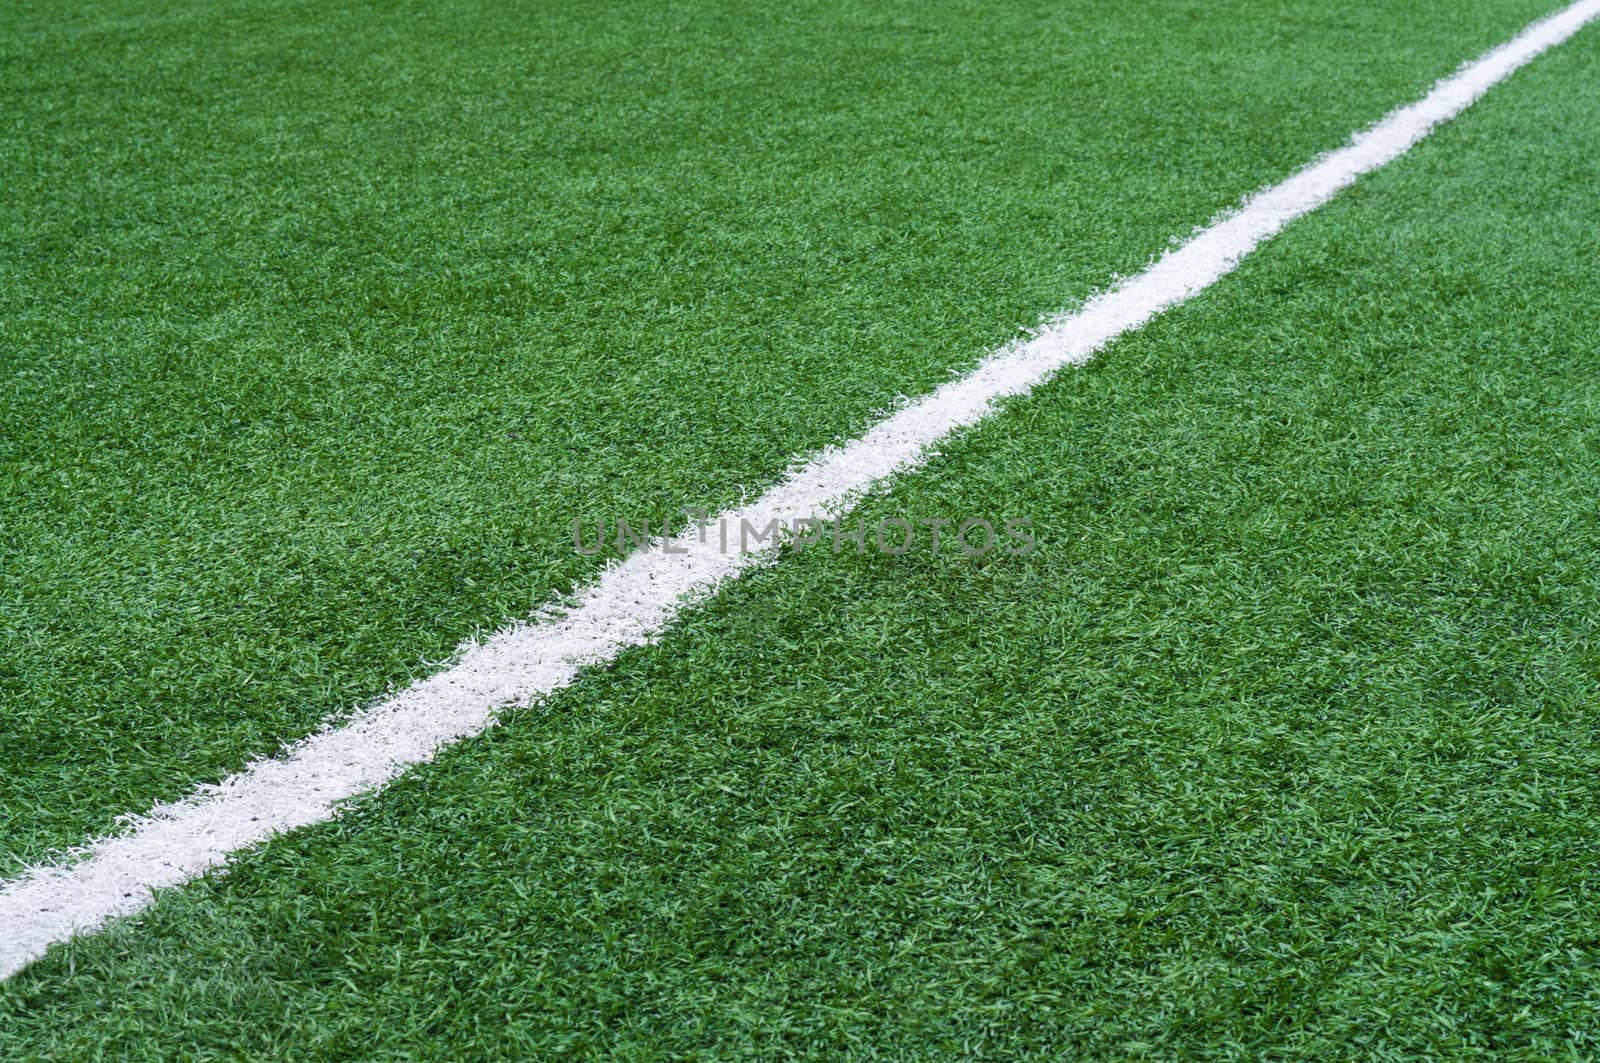 Football field with artificial surface.